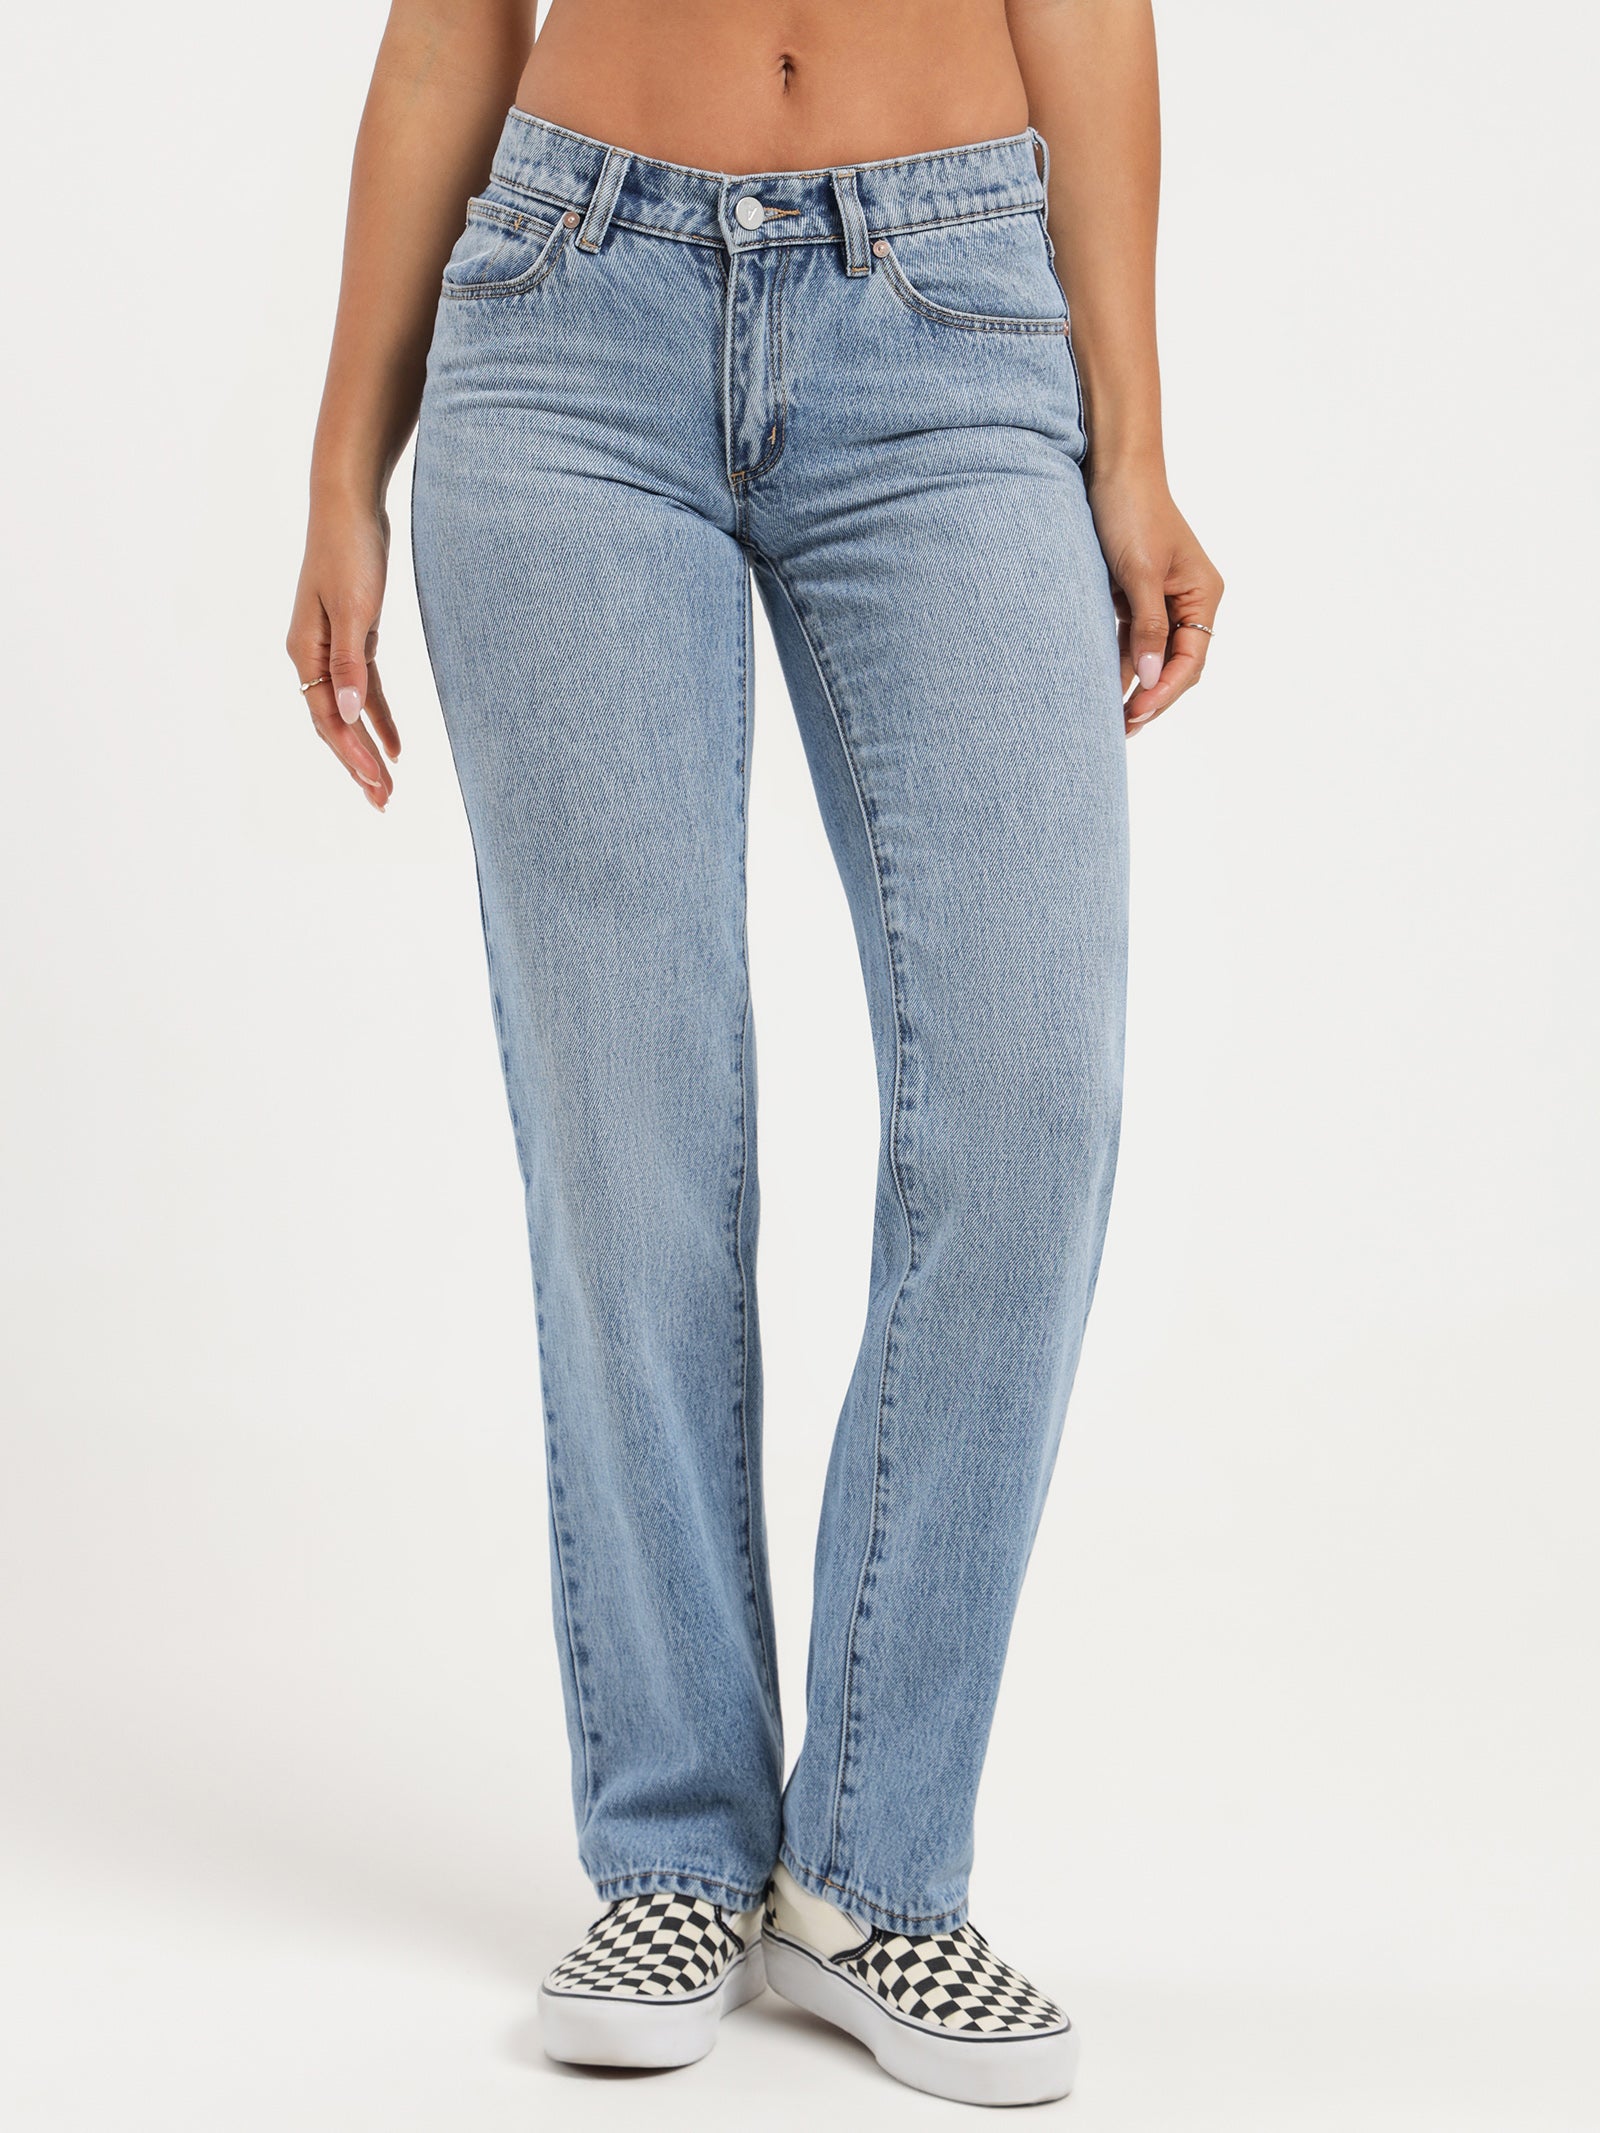 Buy Jordache Essential High Rise Super Skinny Blue Jeans (10, Rinse) at